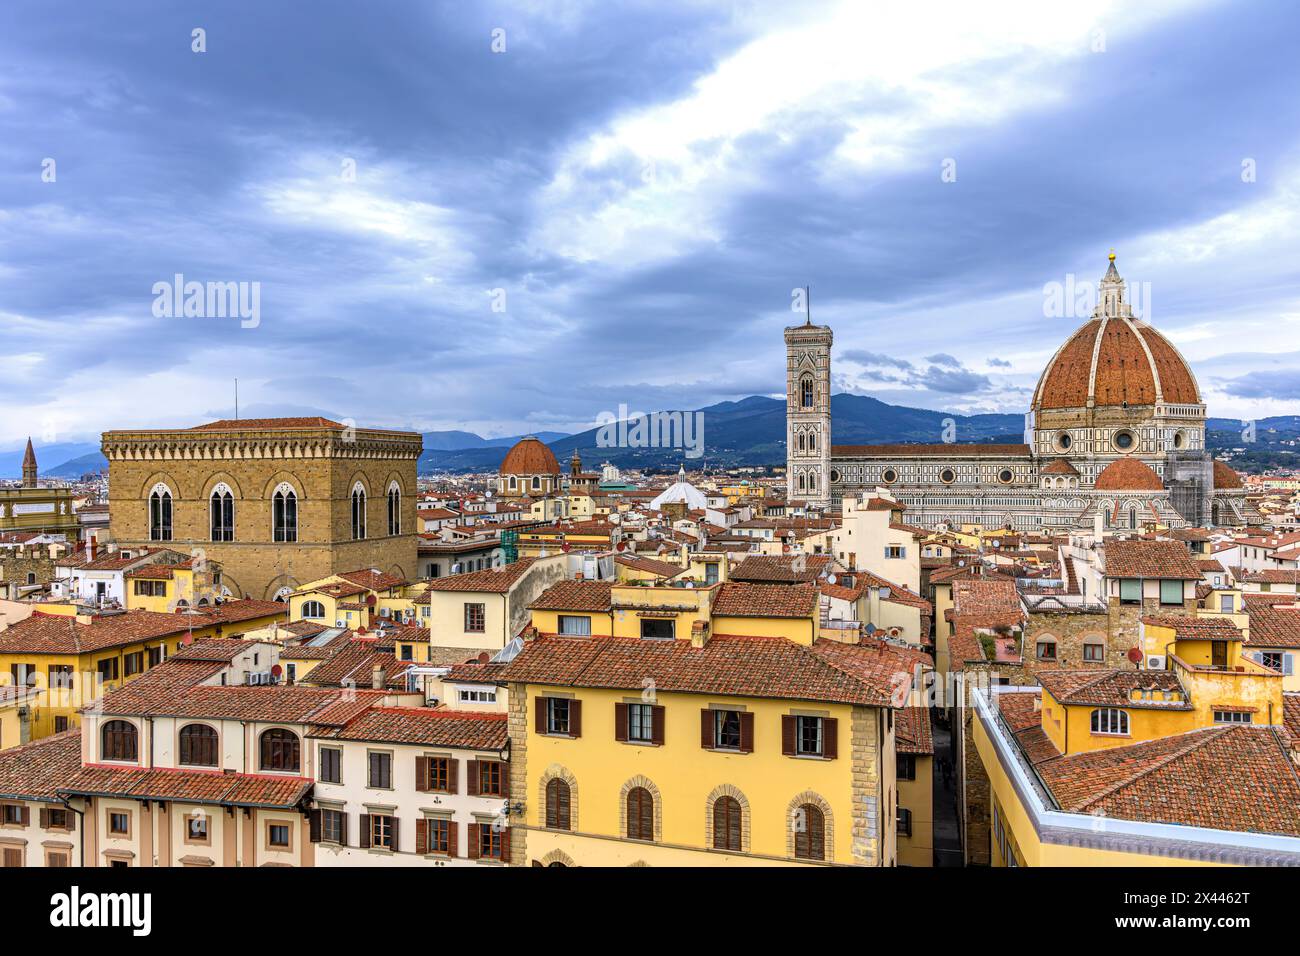 Cathedral of Santa Maria del Fiore, the Baptistery and Giotto's Bell Tower - the most iconic buildings in Florence. Shot from Torre di Arnolfo. Stock Photo